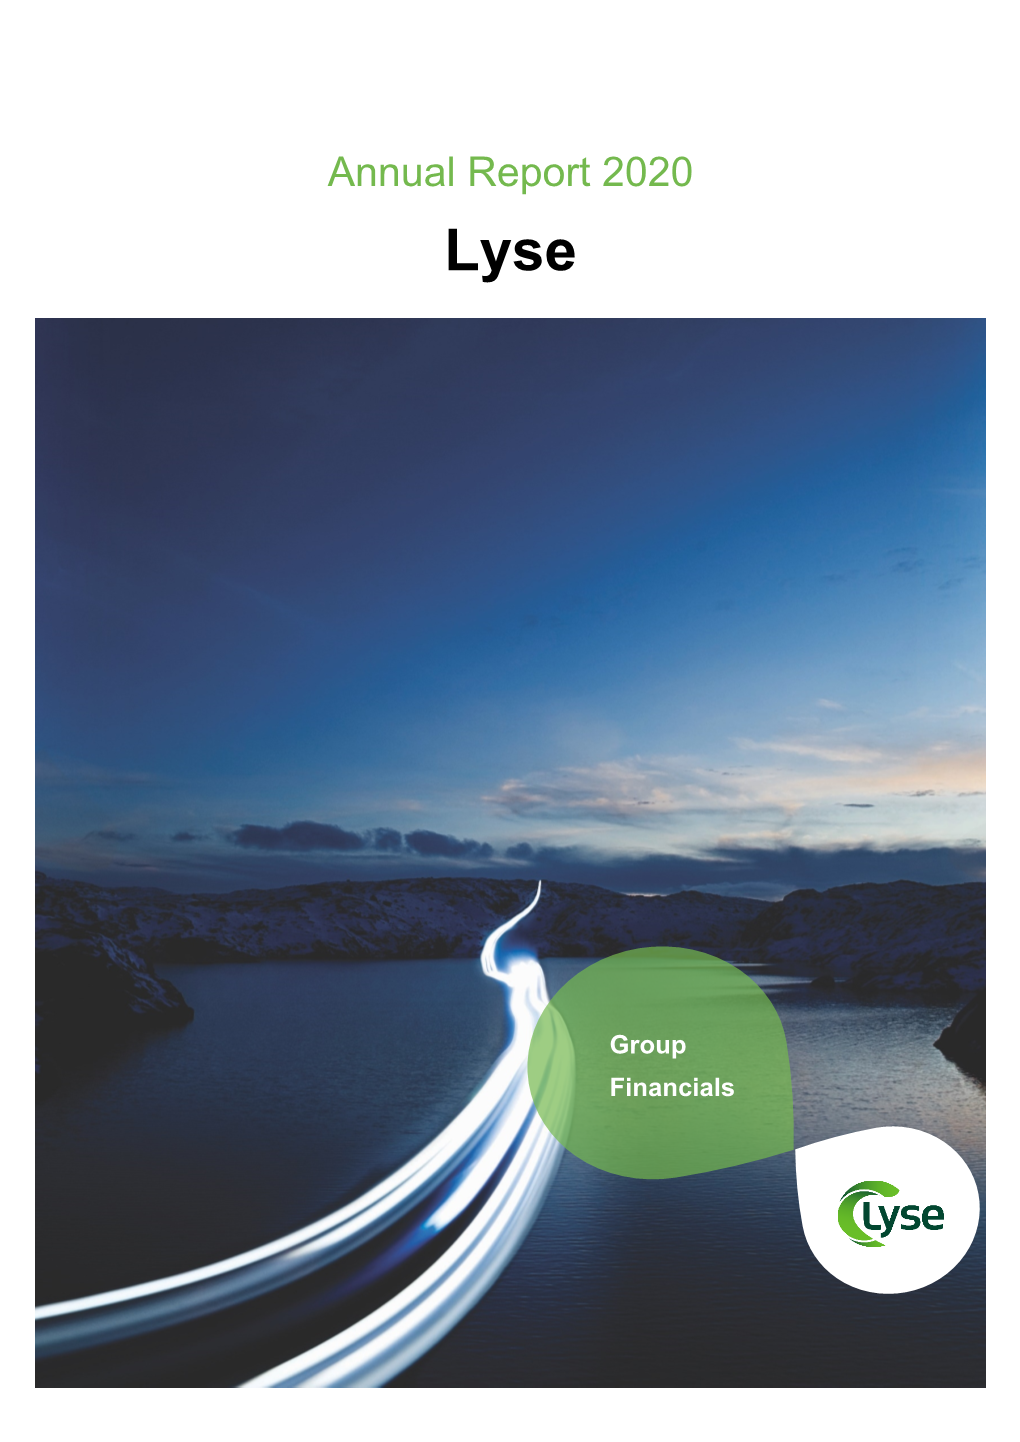 Annual Report 2020 Lyse